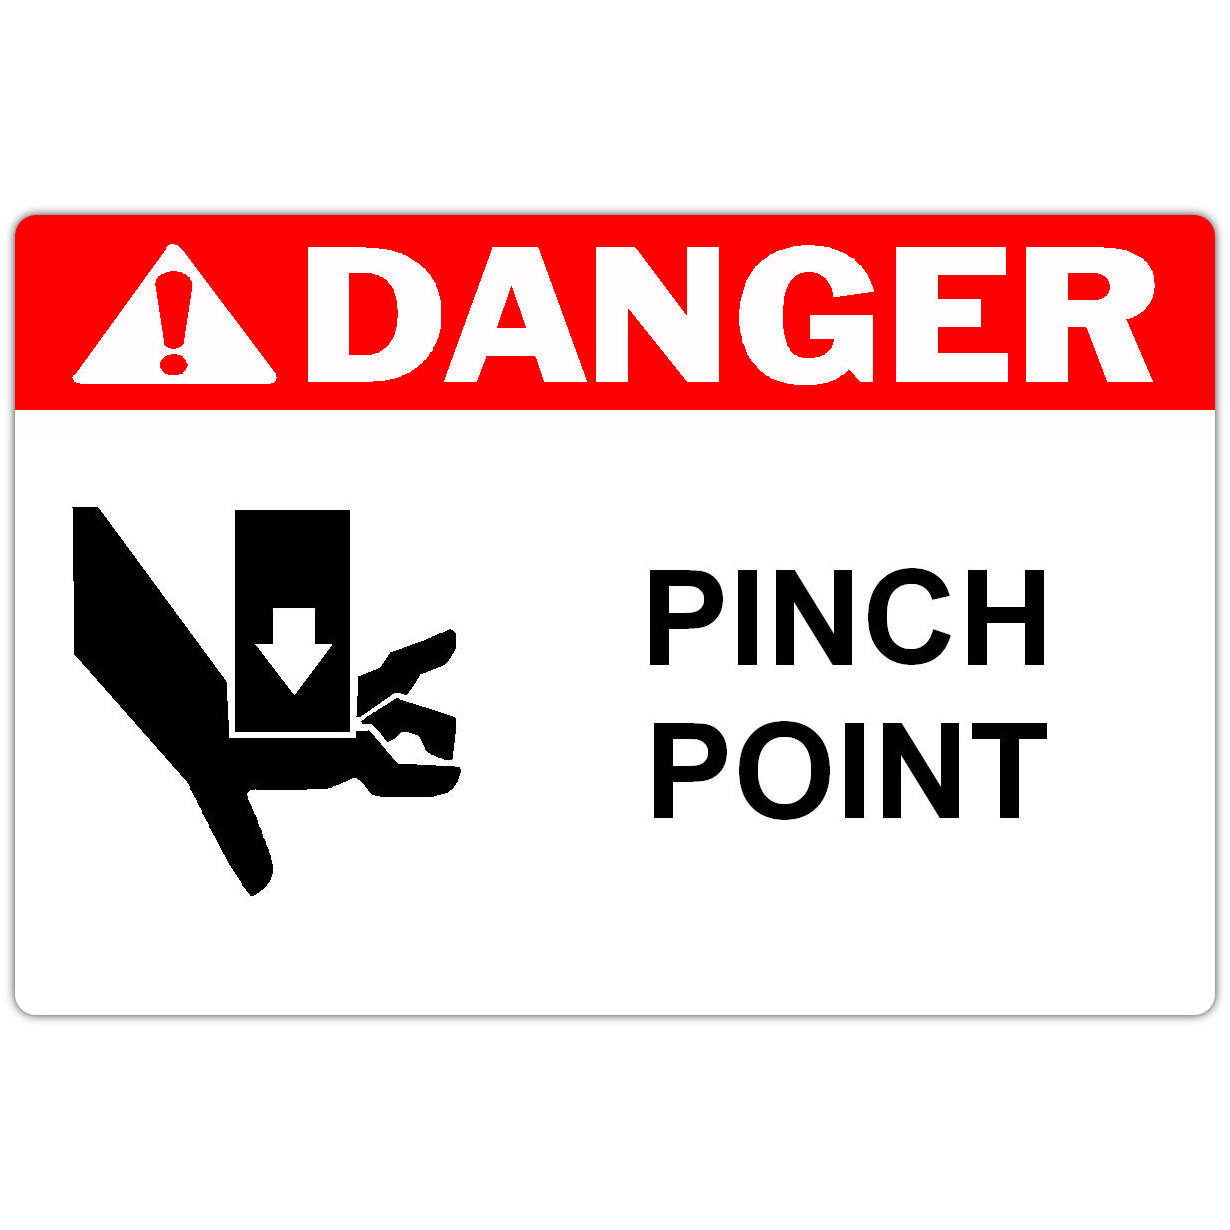 Ask a question about 4" x 6" DANGER Pinch Point Safety Label